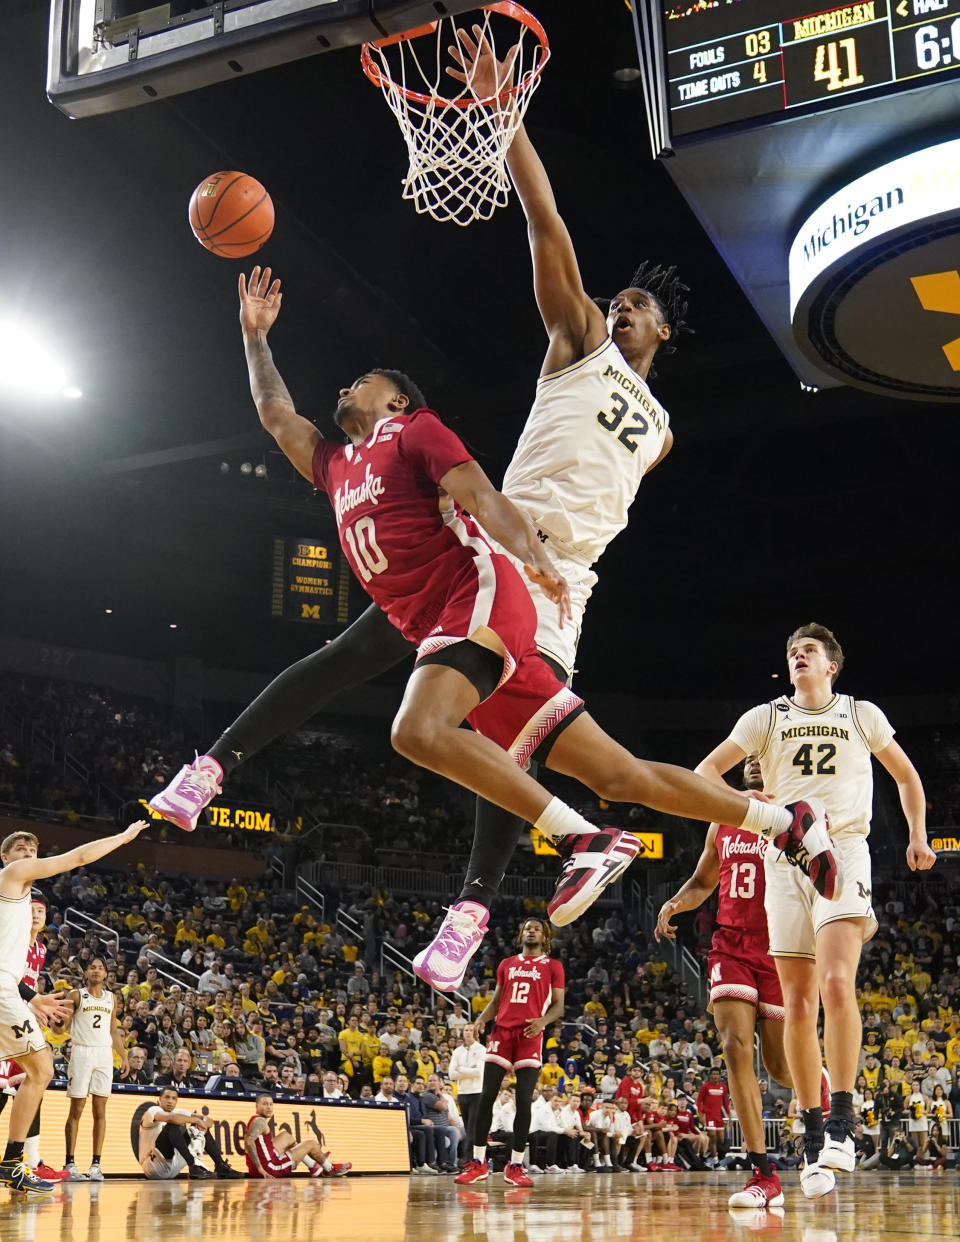 Nebraska guard Jamarques Lawrence (10) attempts a layup as Michigan forward Tarris Reed Jr. (32) defends during the first half of an NCAA college basketball game, Wednesday, Feb. 8, 2023, in Ann Arbor, Mich. (AP Photo/Carlos Osorio)